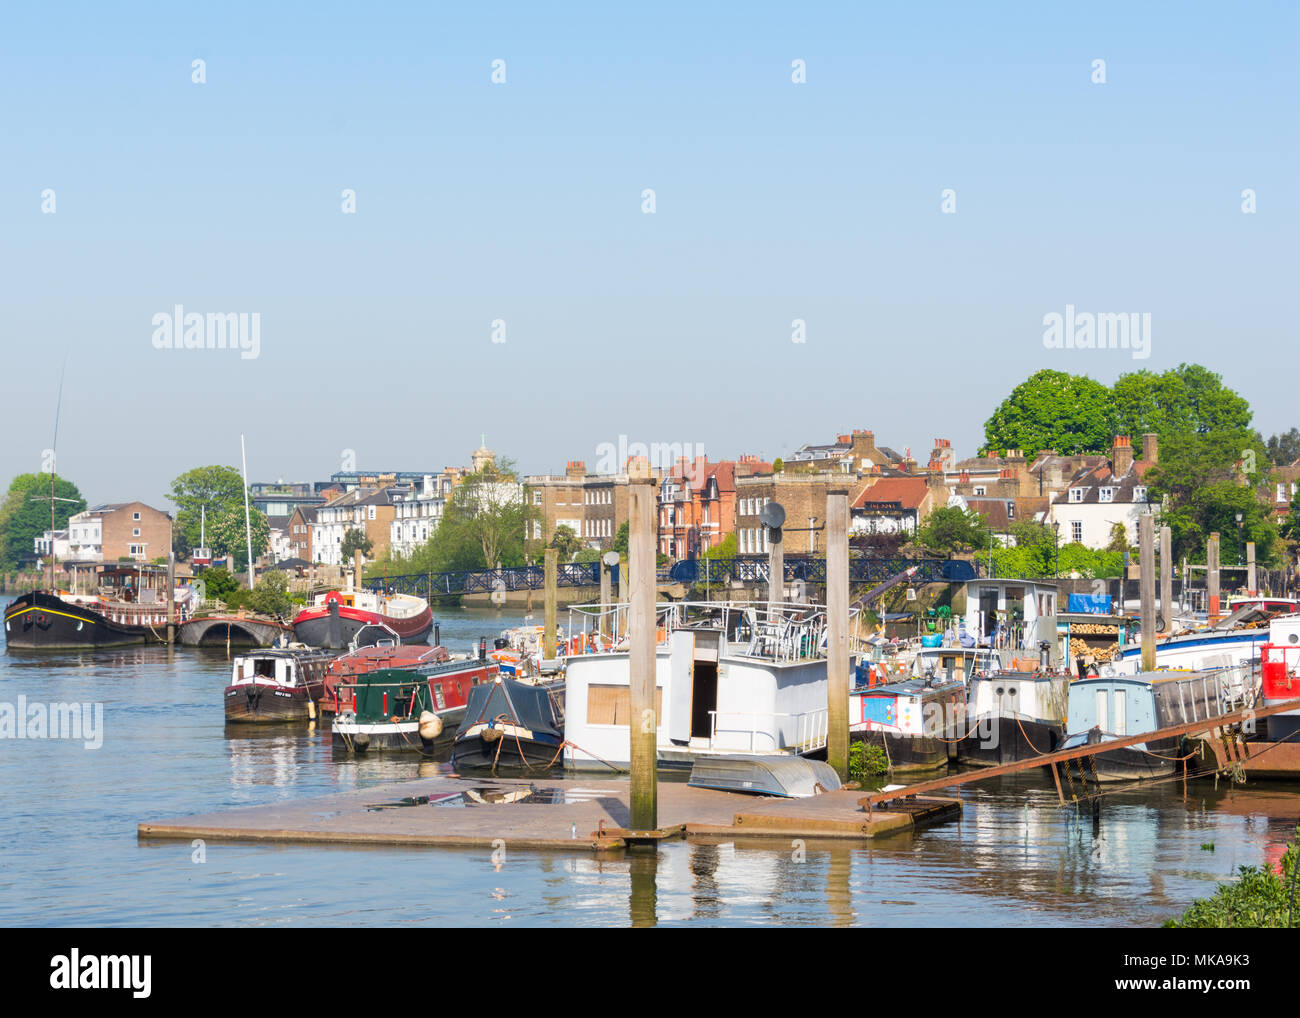 Hammersmith, London, UK. 07 May, 2018: This bank holiday weekend is expected to be one of the hottest on record and also the hottest day of the year so far. Credit: Bradley Smith/Alamy Live News. Stock Photo